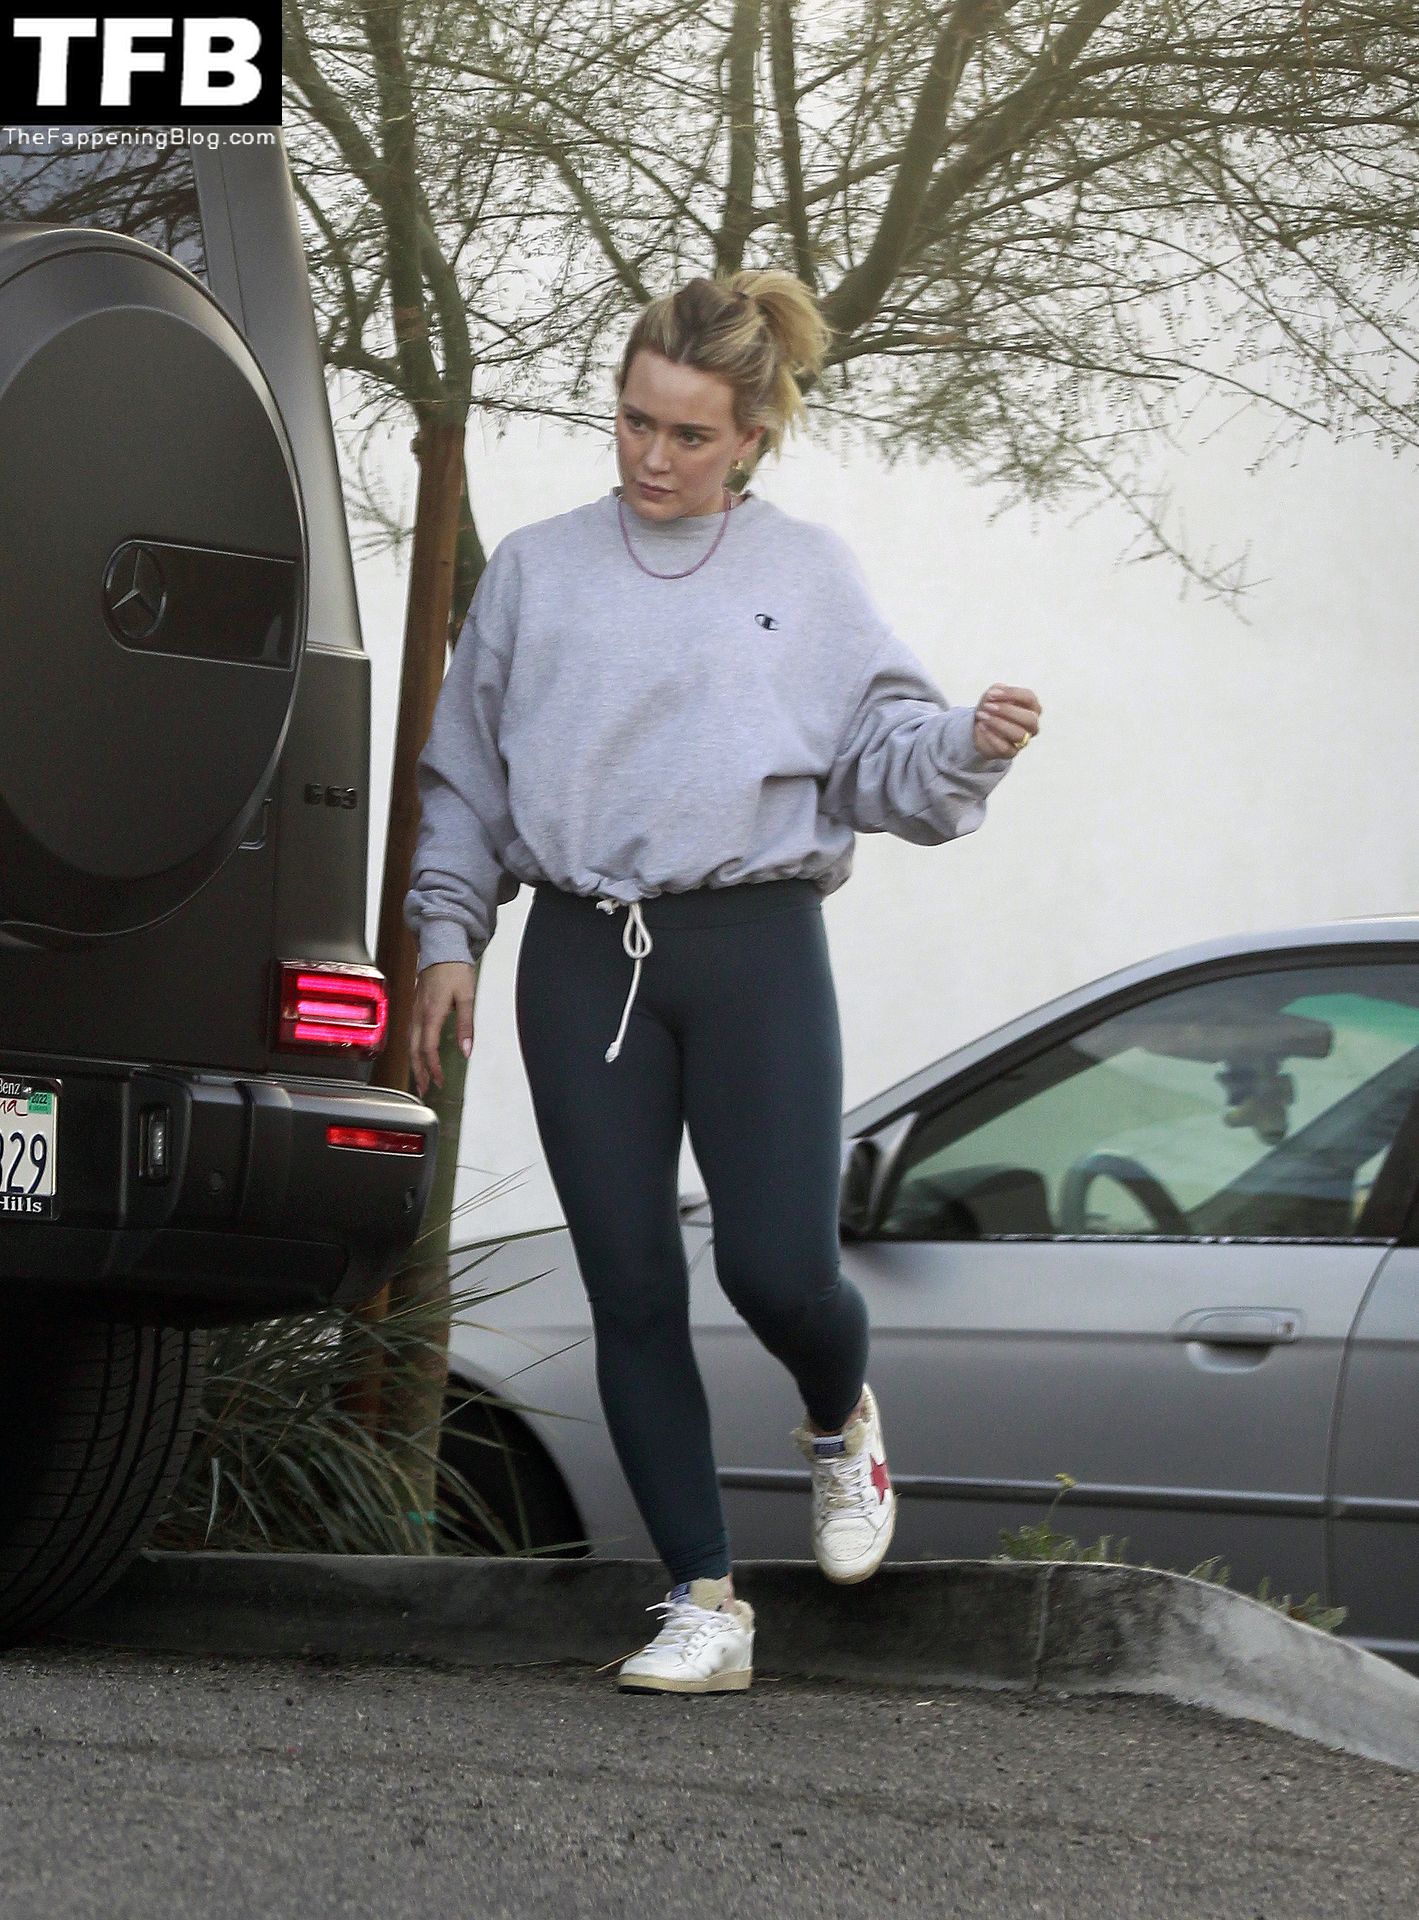 Hilary-Duff-shows-off-impressive-gym-results-in-a-pair-of-skintight-leggings-during-LA-errand-run...-one-day-after-hosting-quaint-Thanksgiving-gathering-at-her-home-The-Fappening-Blog-7.jpg